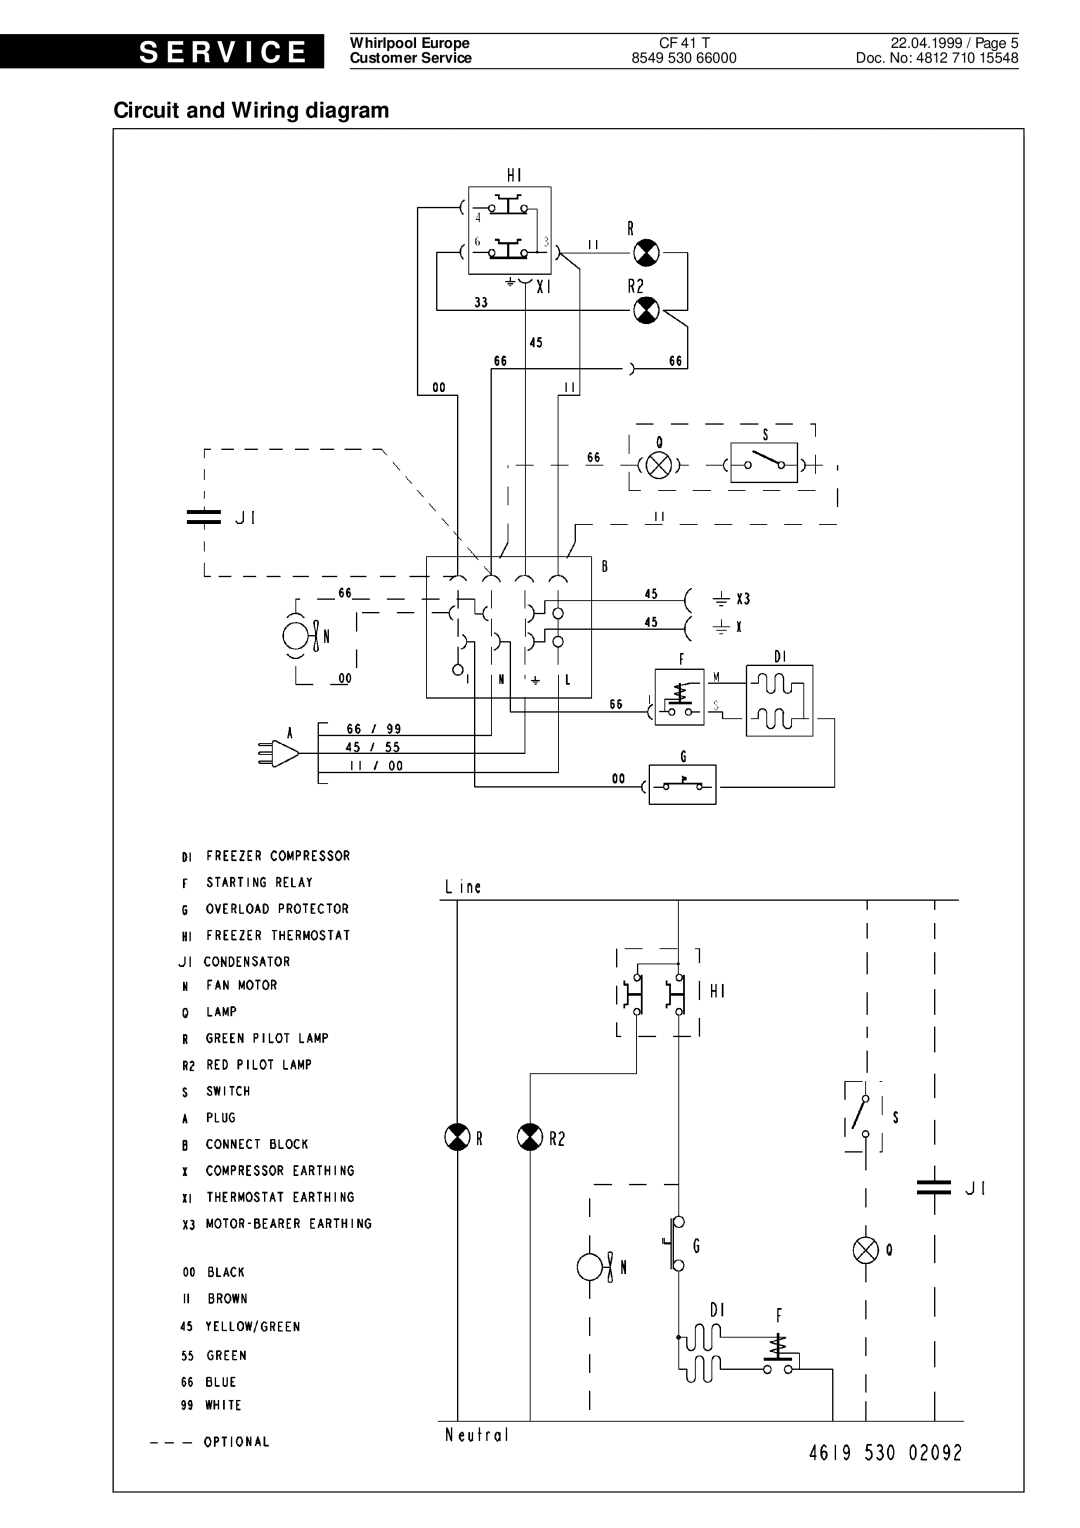 Whirlpool 41 Circuit and Wiring diagram, S E R V I C E, Whirlpool Europe, Customer Service, 22.04.1999 / Page, Doc. No 